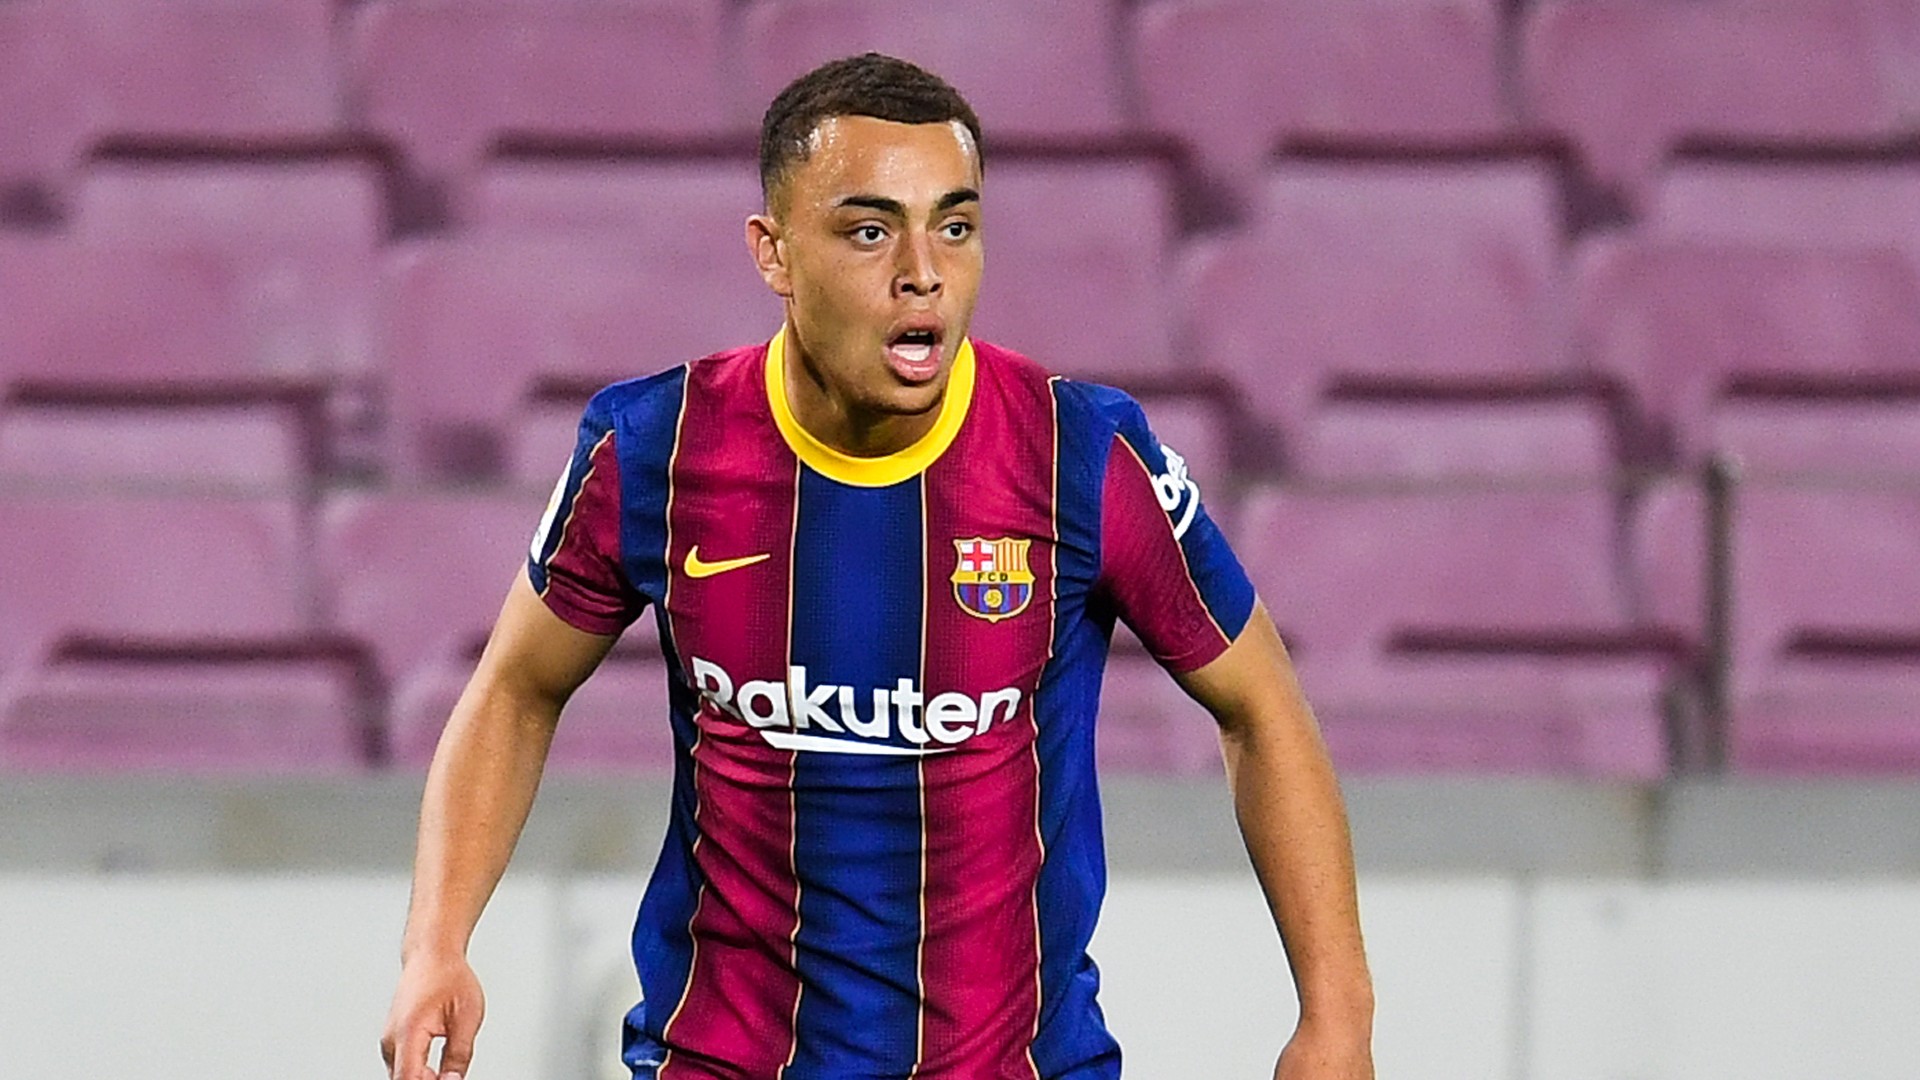 'Wow! I play for Barcelona!' - Dest still coming to grips with move to Camp Nou